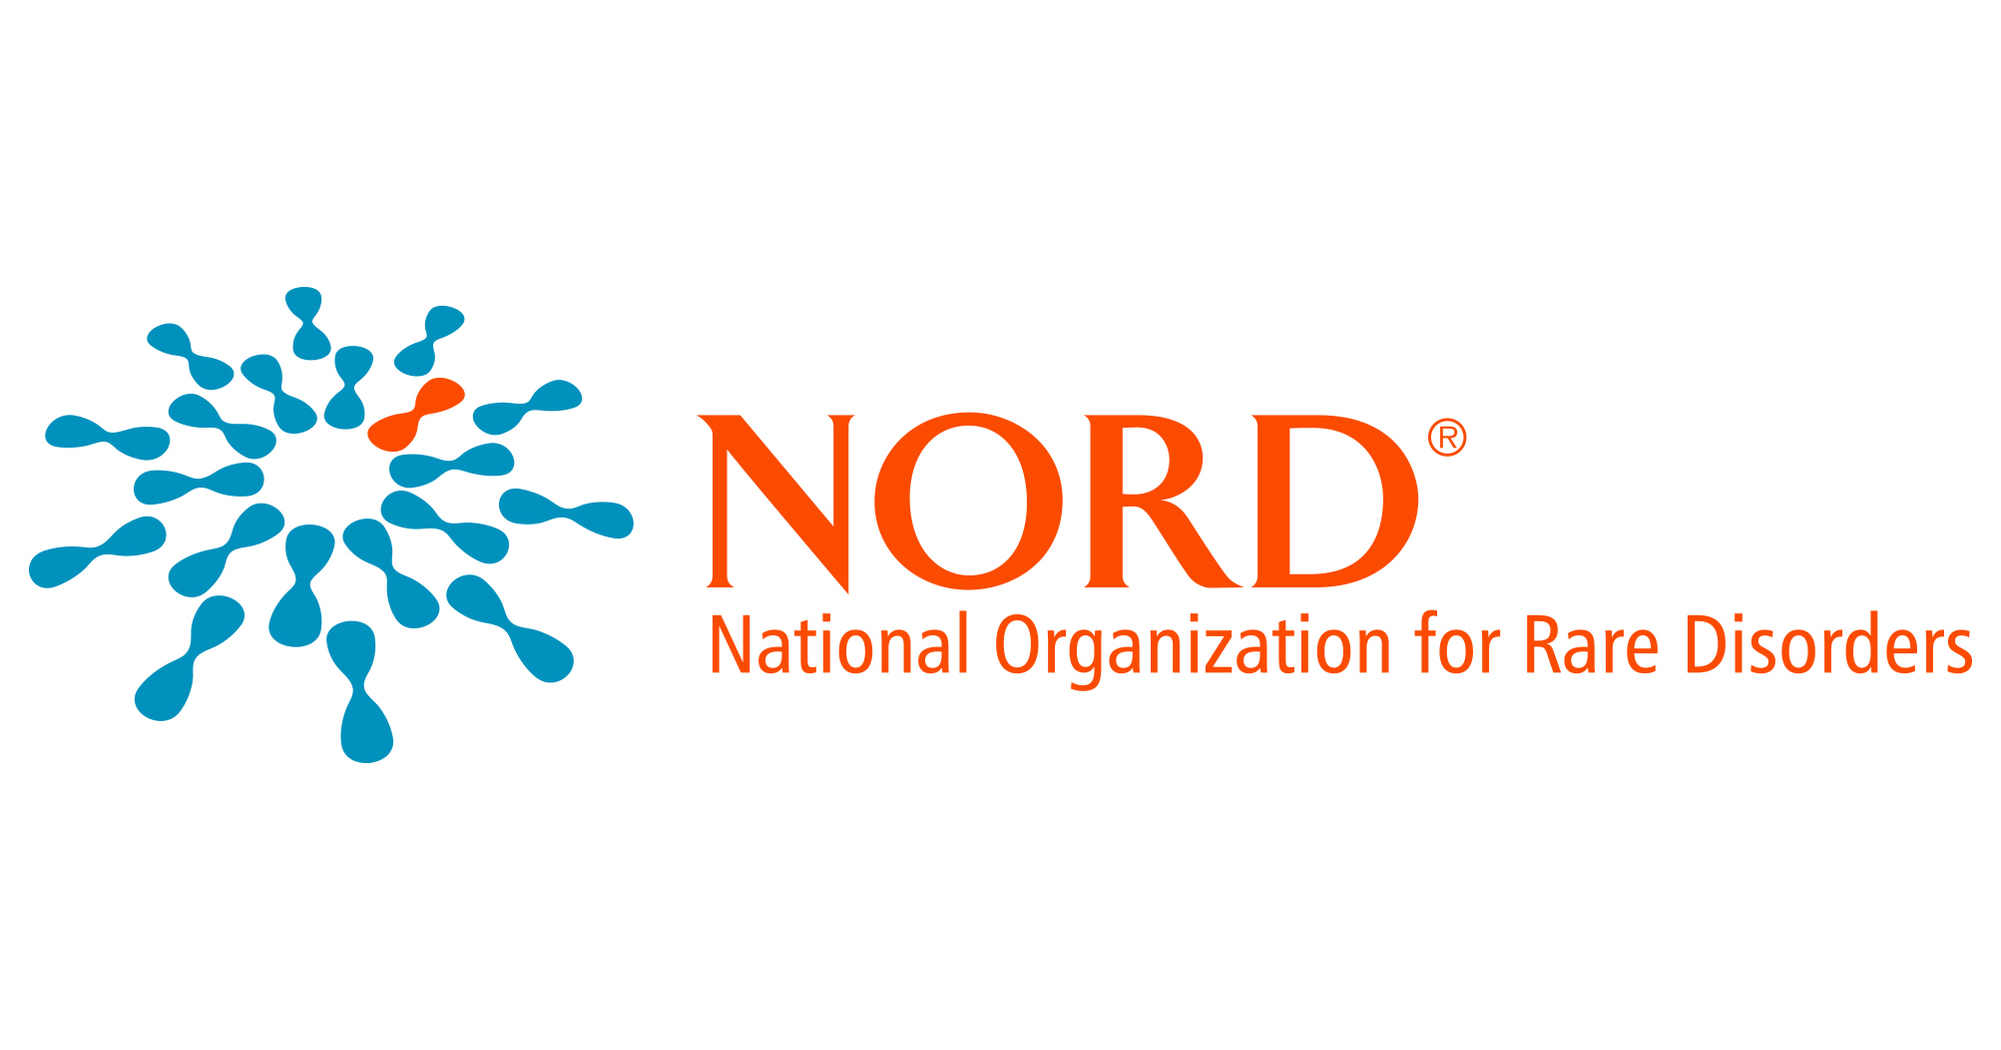 NORD, National Organization for Rare Diseases (EE. UU.)